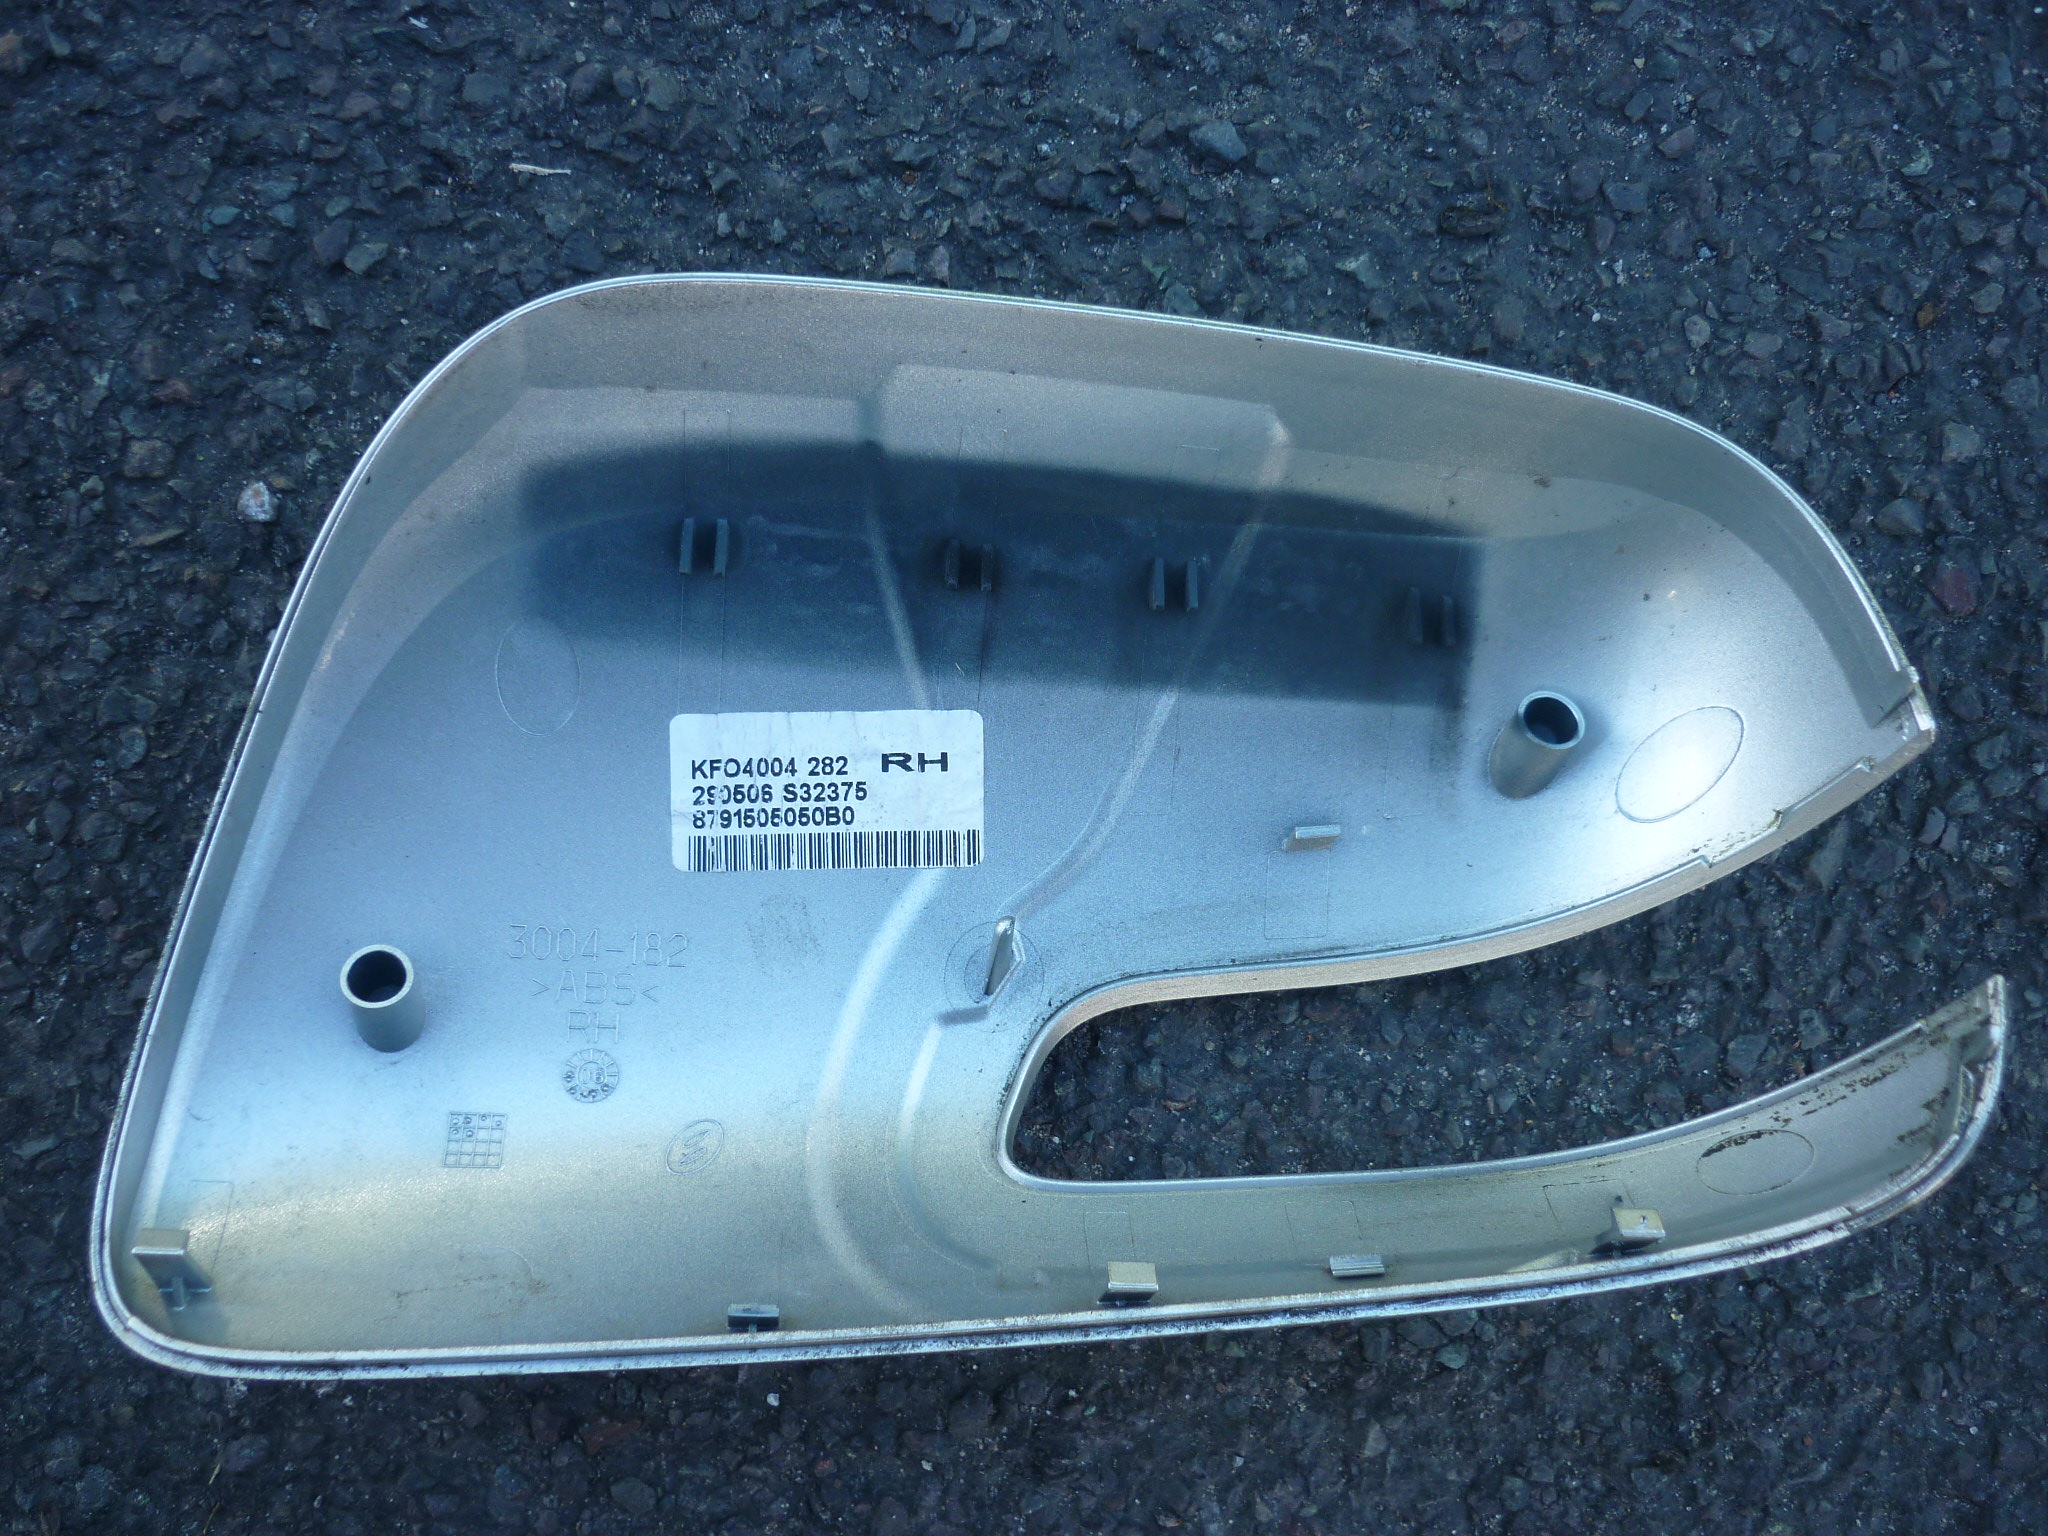 Driver side mirror cover.JPG